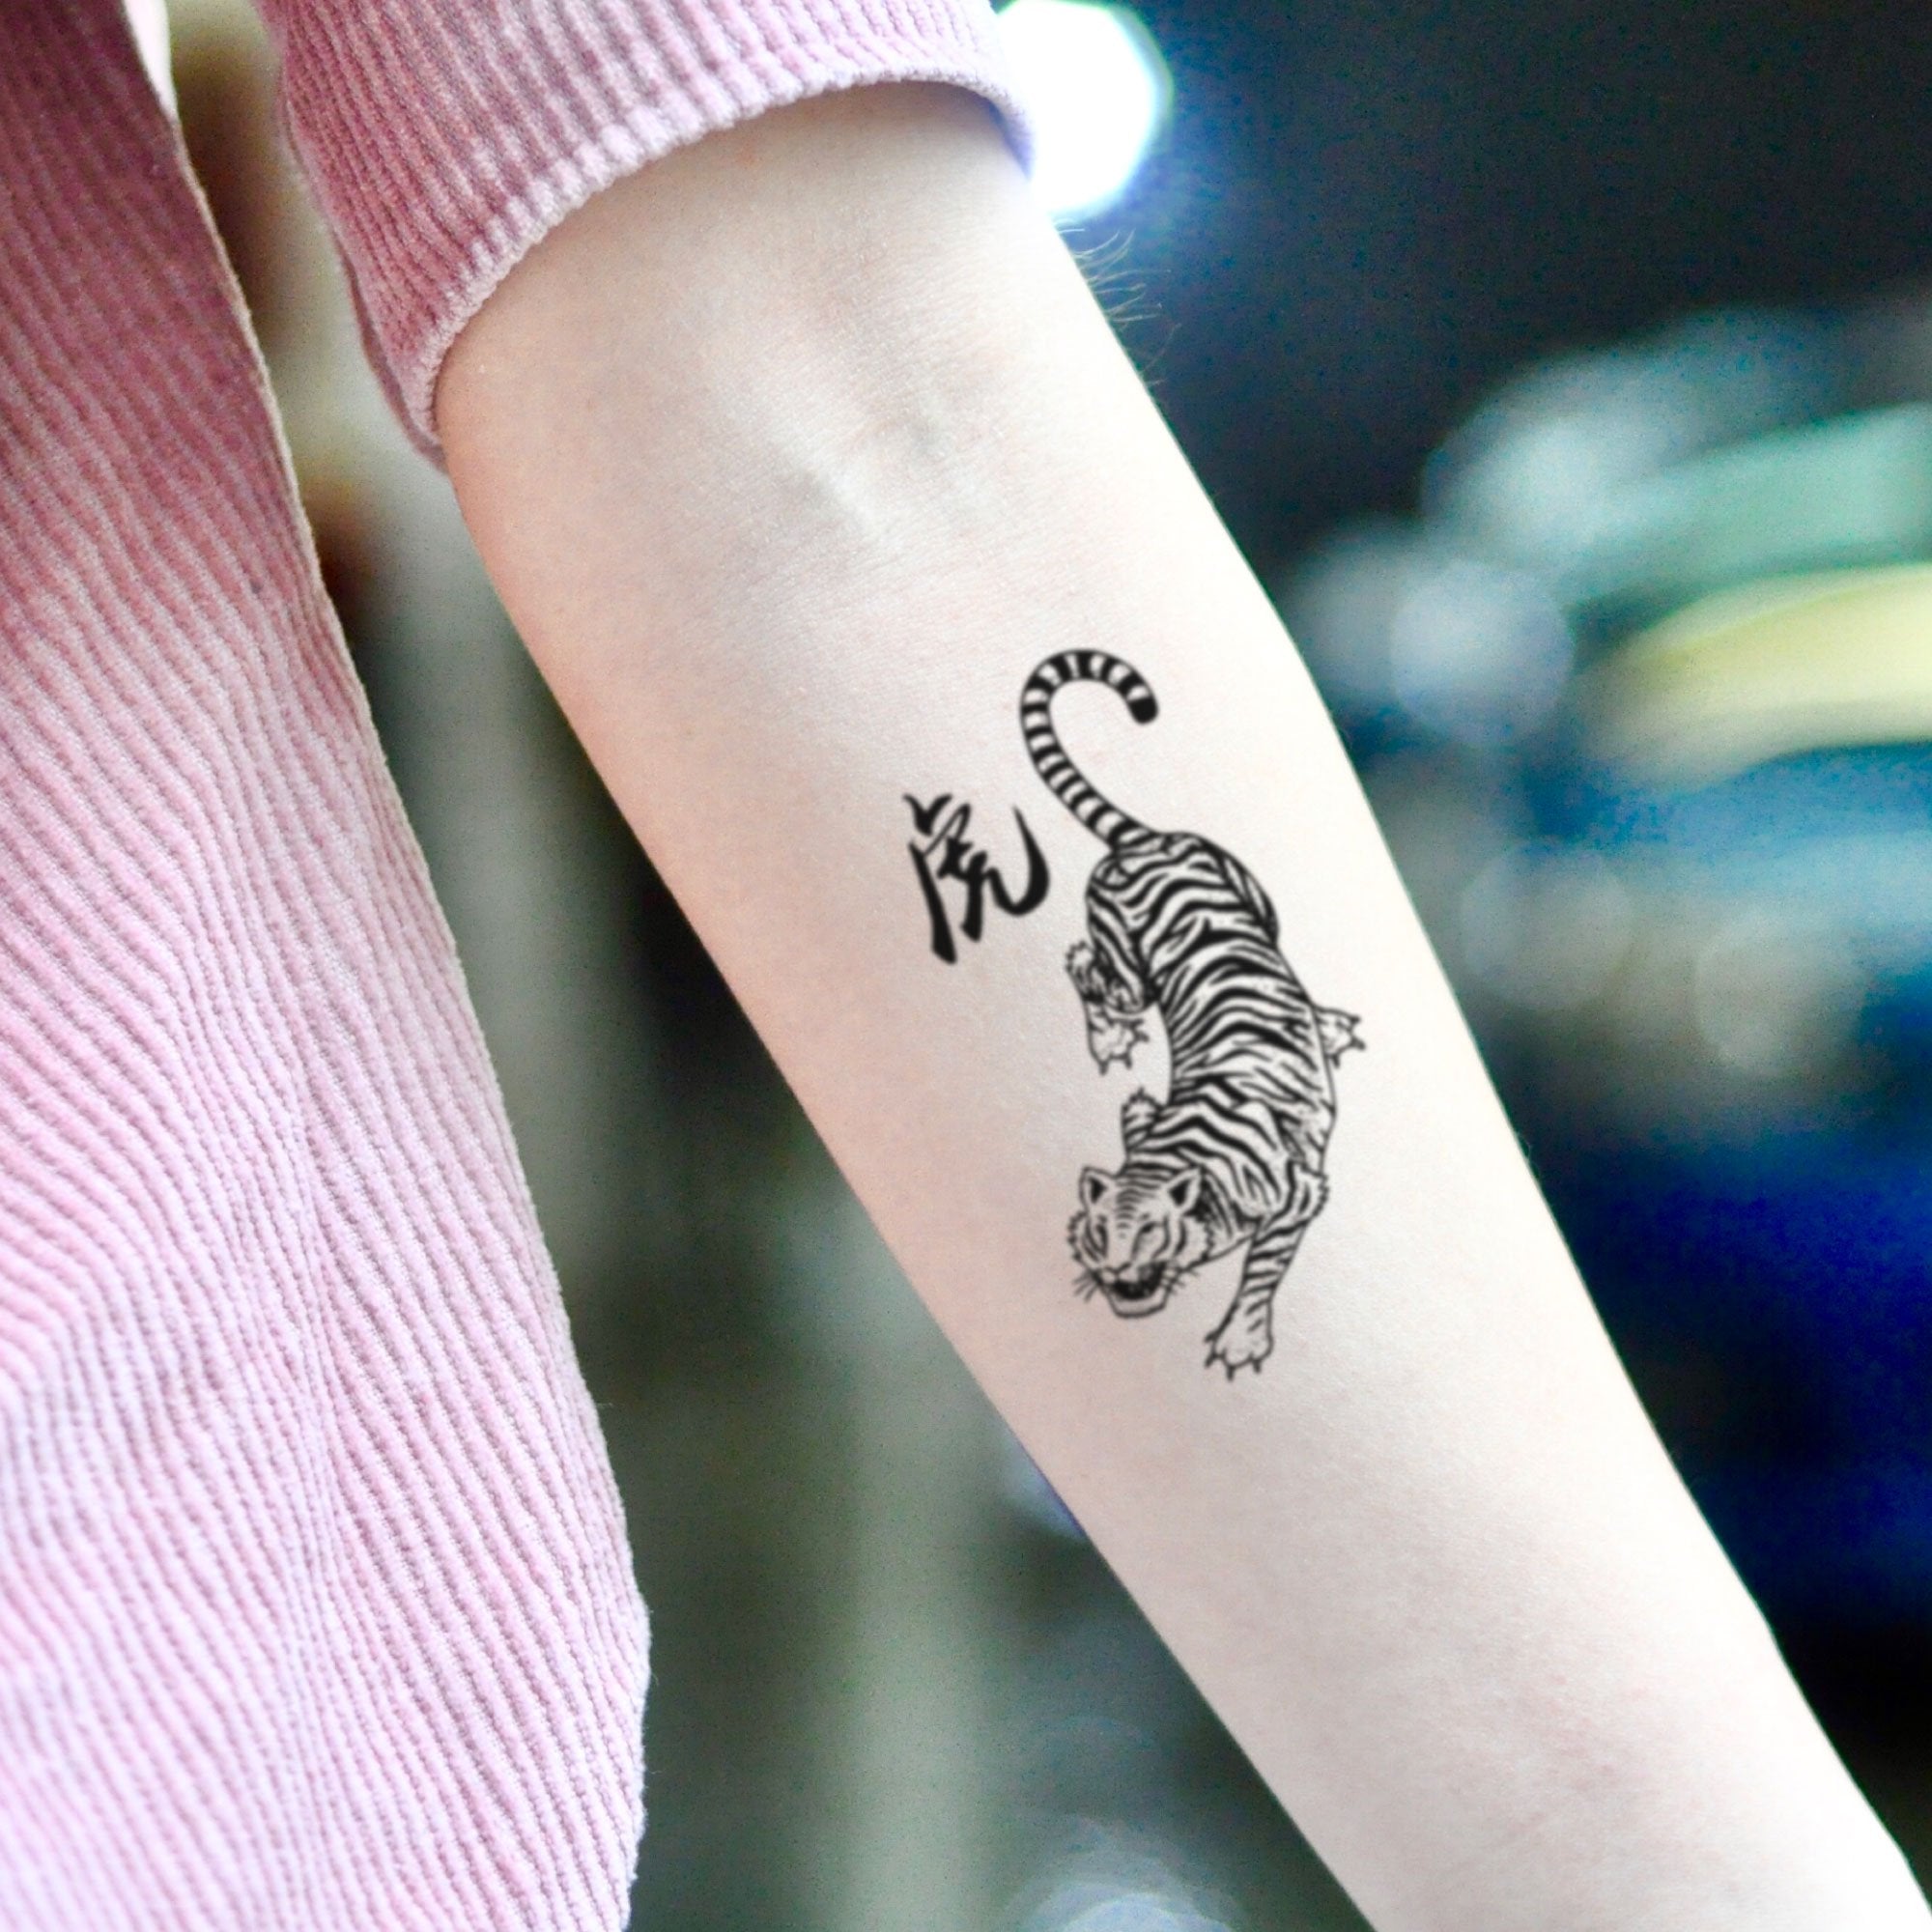 New Fashion Water Proof Tiger Style Mens Arm Temporary Tattoo Sticker  Buy  Mens Arm Temporary Tattoo StickerMens Arm Temporary TattooMens Arm Tattoo  Sticker Product on Alibabacom